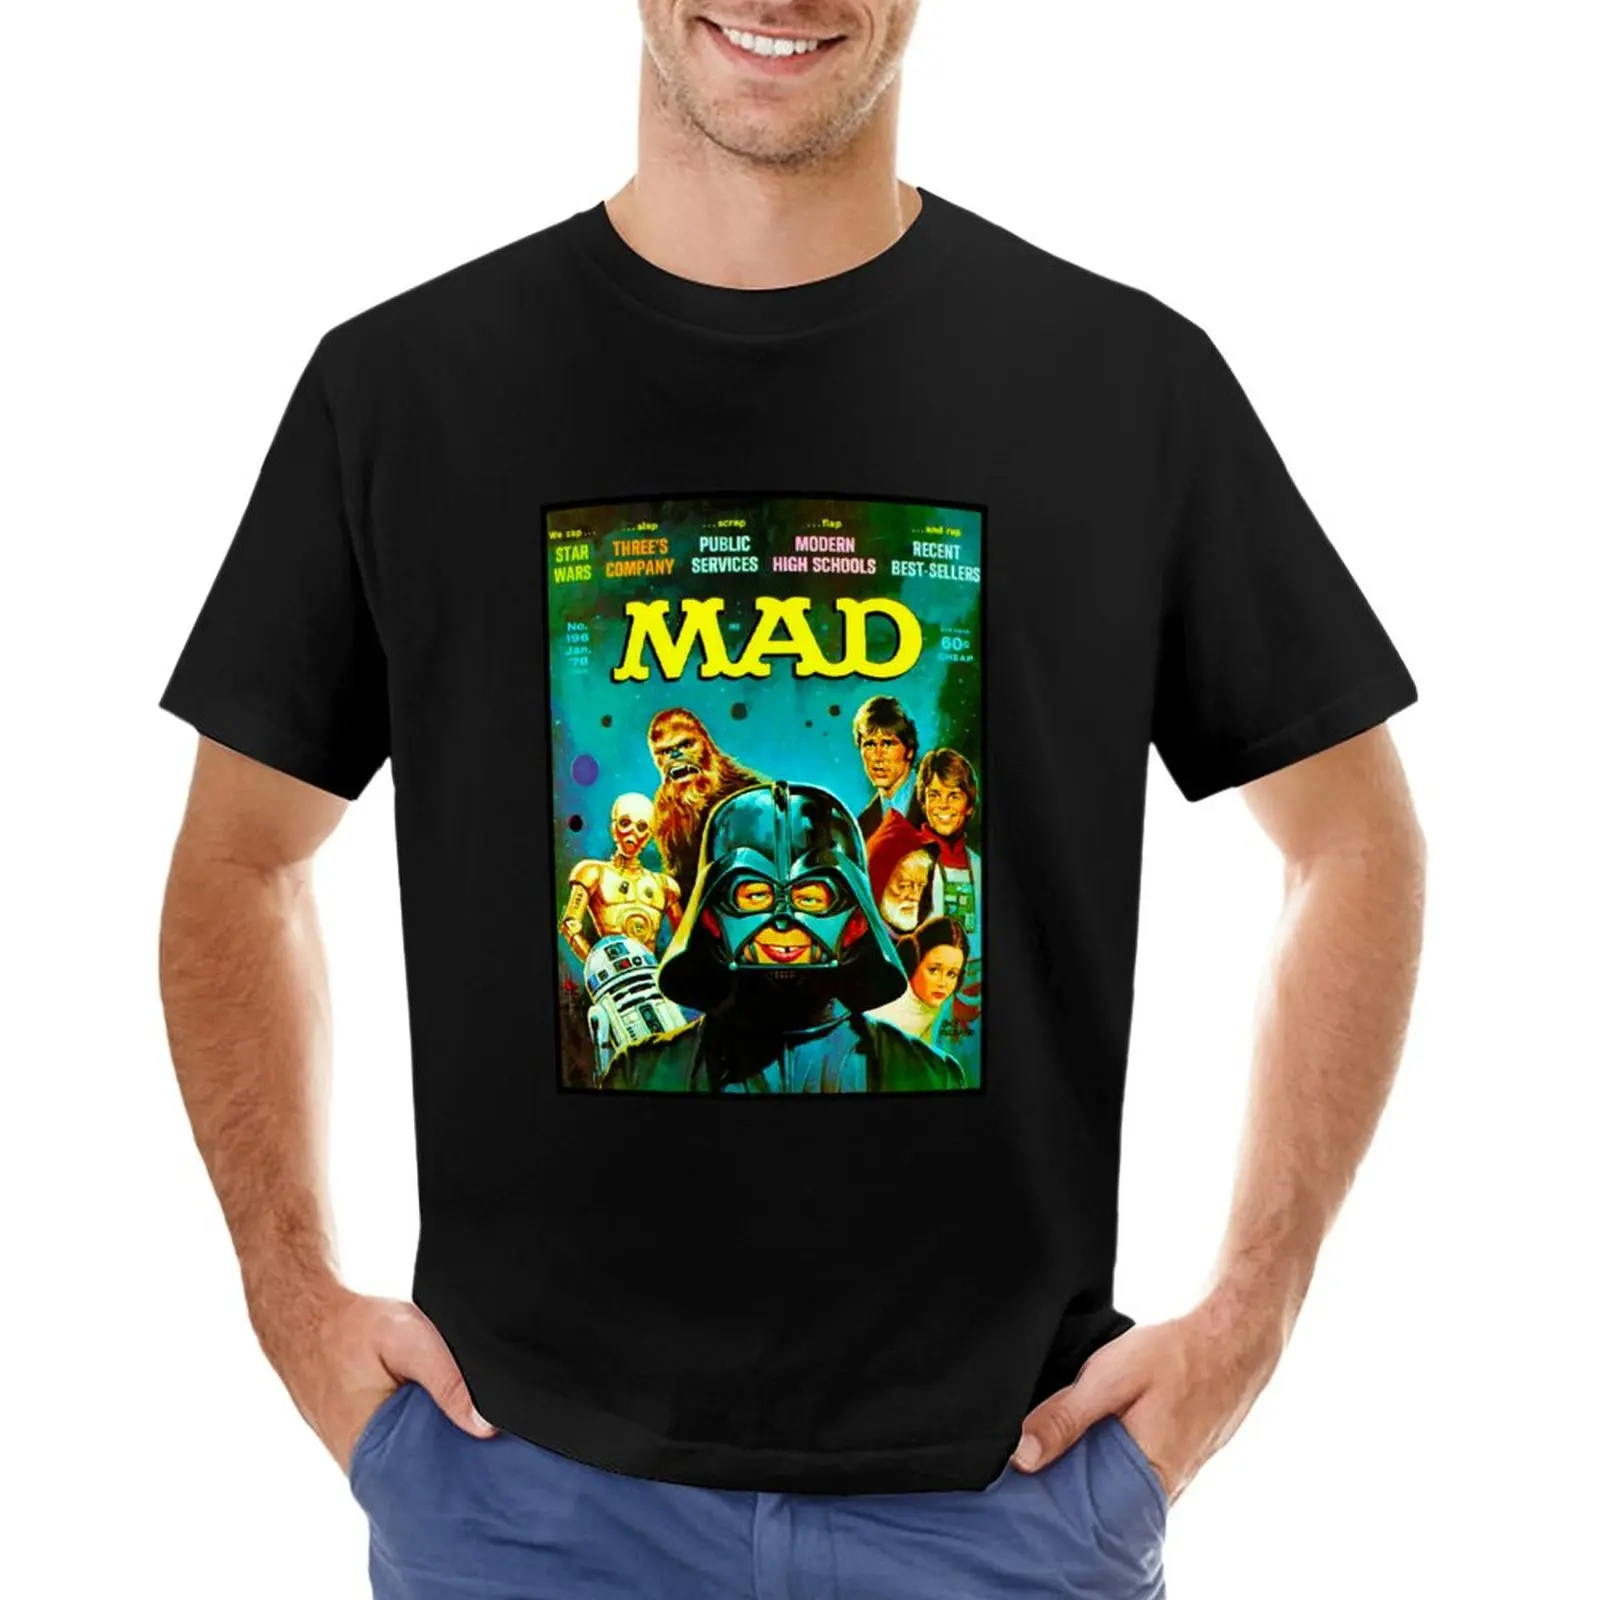 

A GREAT CLASSIC MAD MAGAZINE COVER, #196 T-Shirt plain t-shirt new edition t shirt Short t-shirt mens graphic t-shirts pack